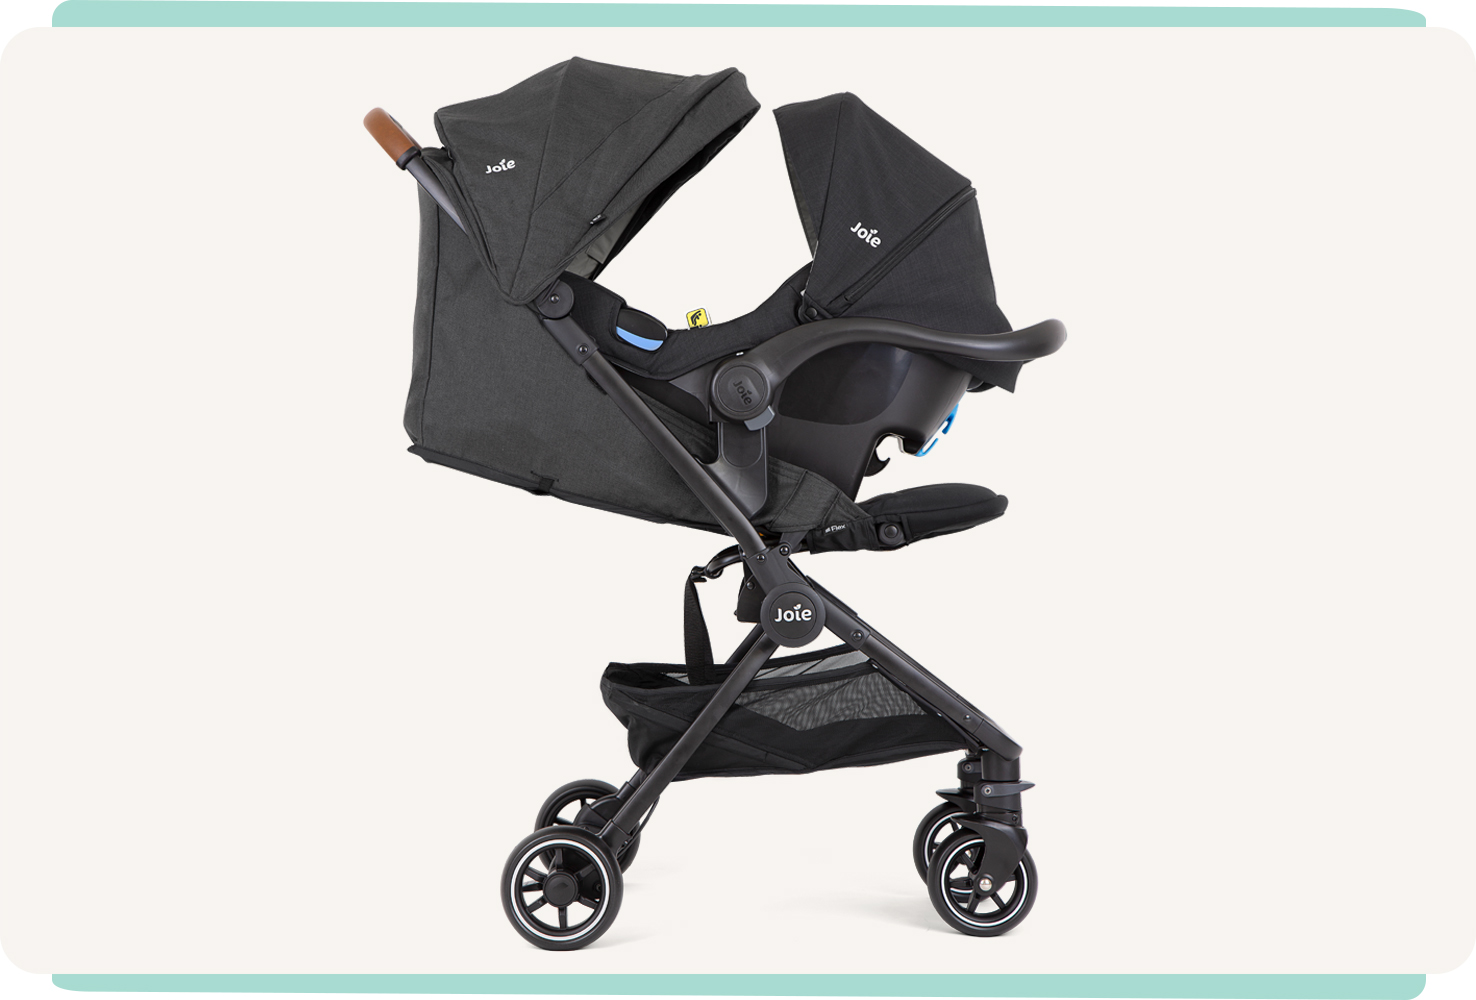  A black Joie Pact Flex stroller in profile, with an infant car seat attached.